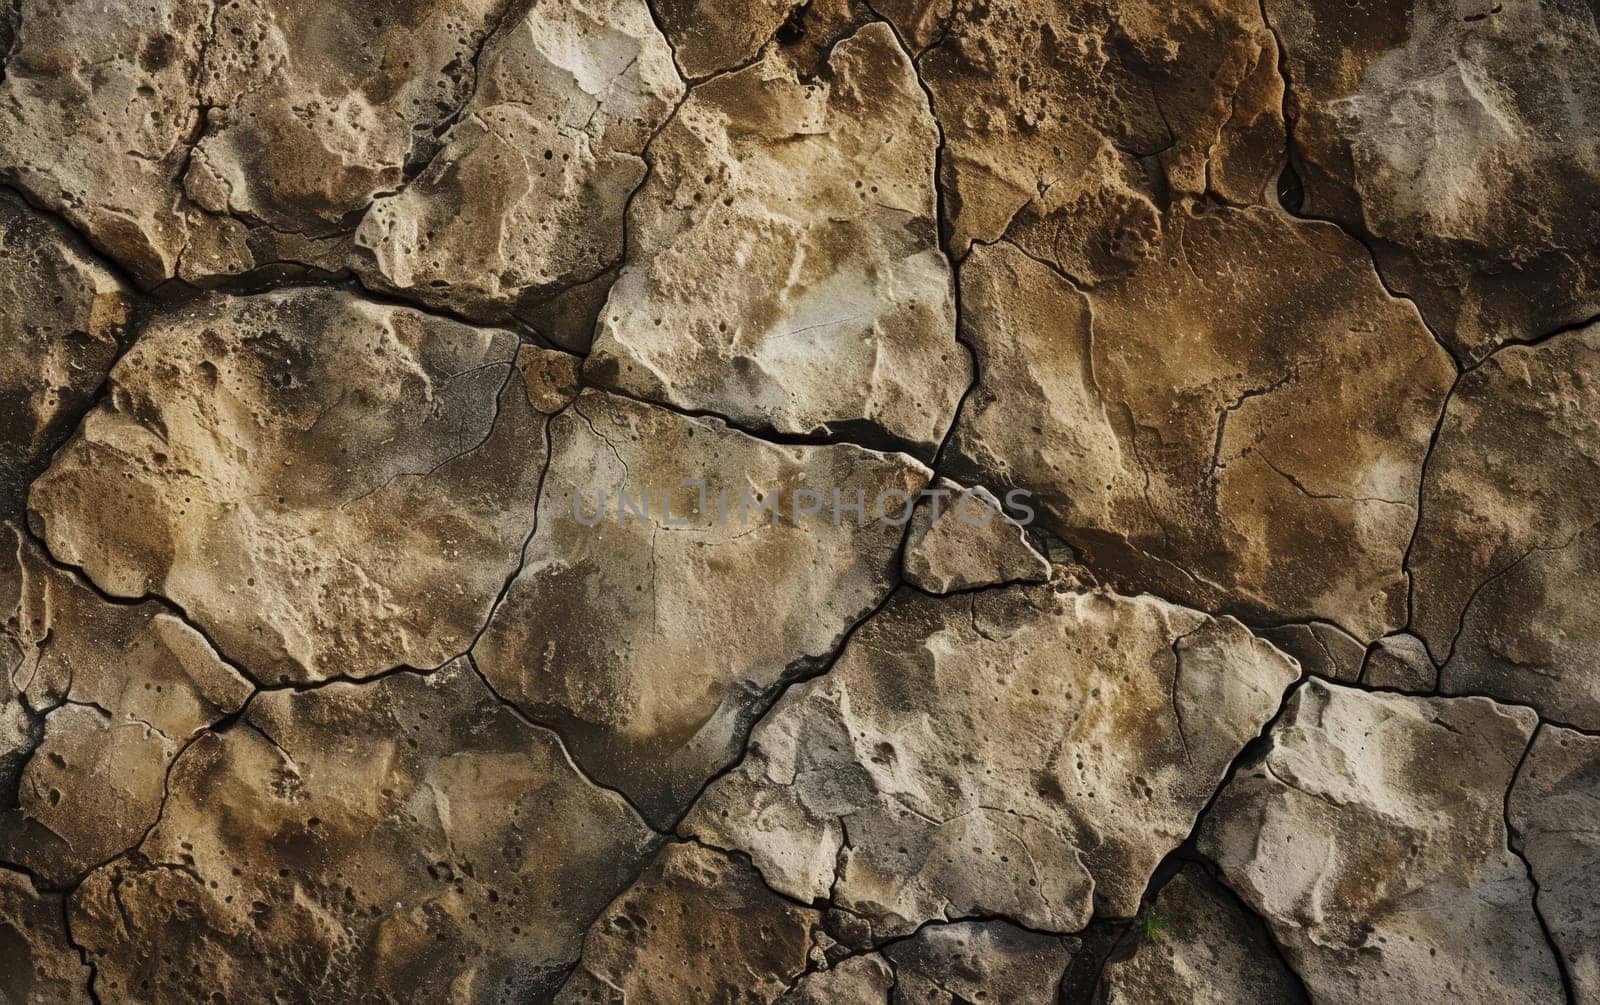 Arid landscape with cracked earth texture in a drought-affected region